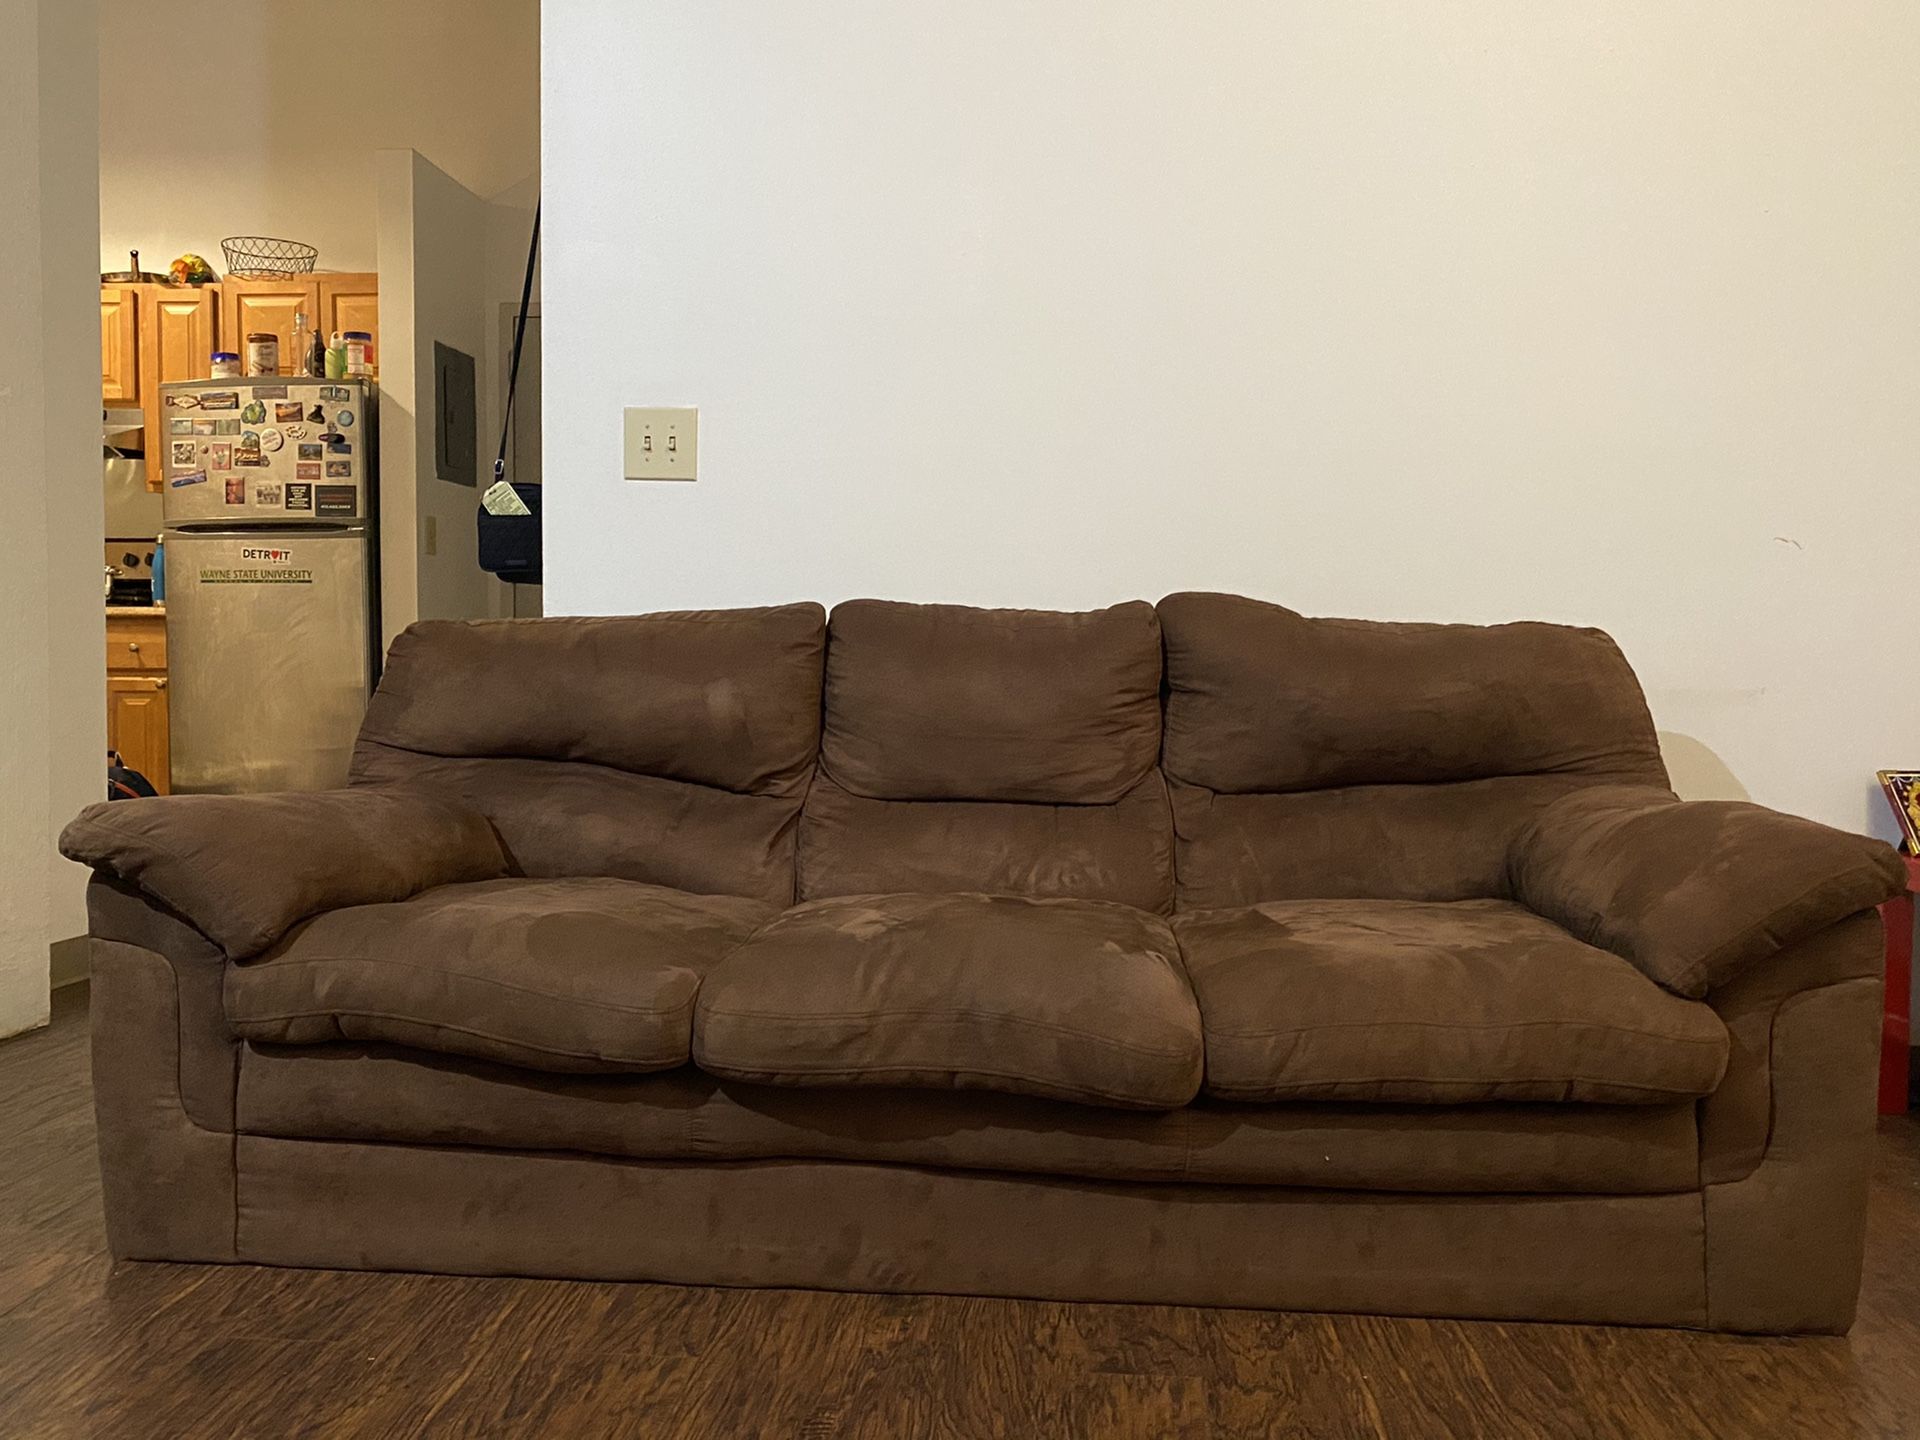 Chocolate Brown couch